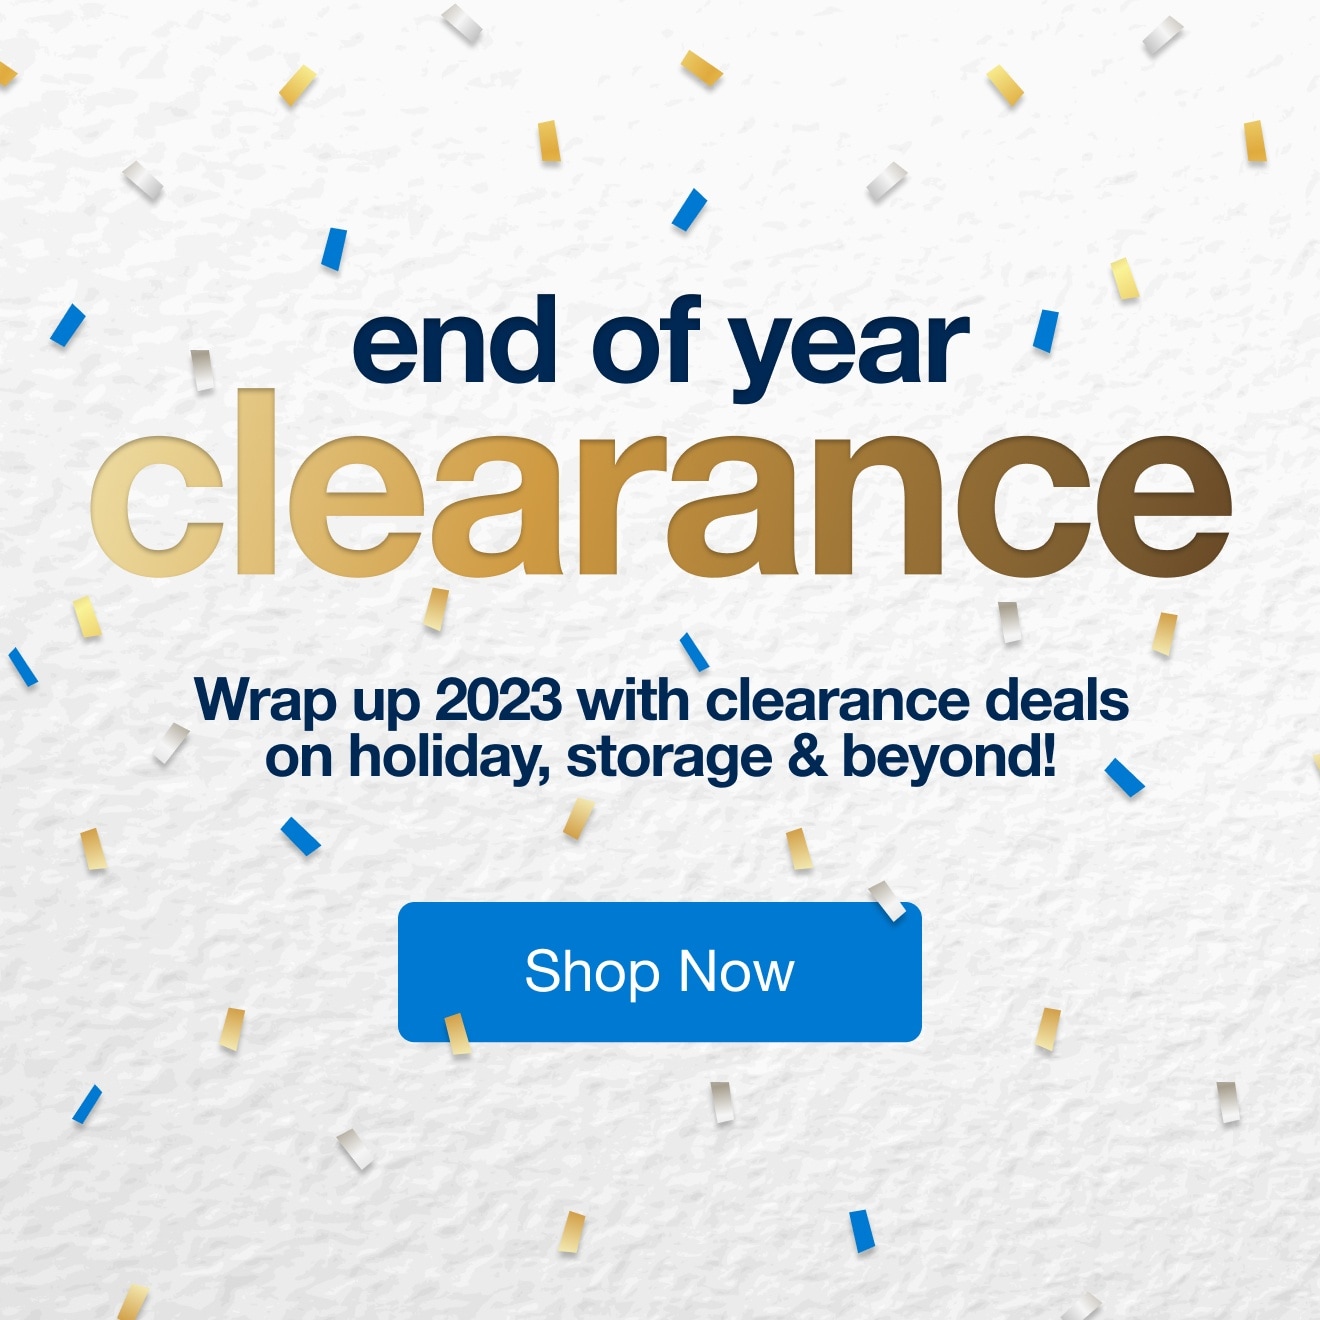 End of Year Clearance - Shop Now